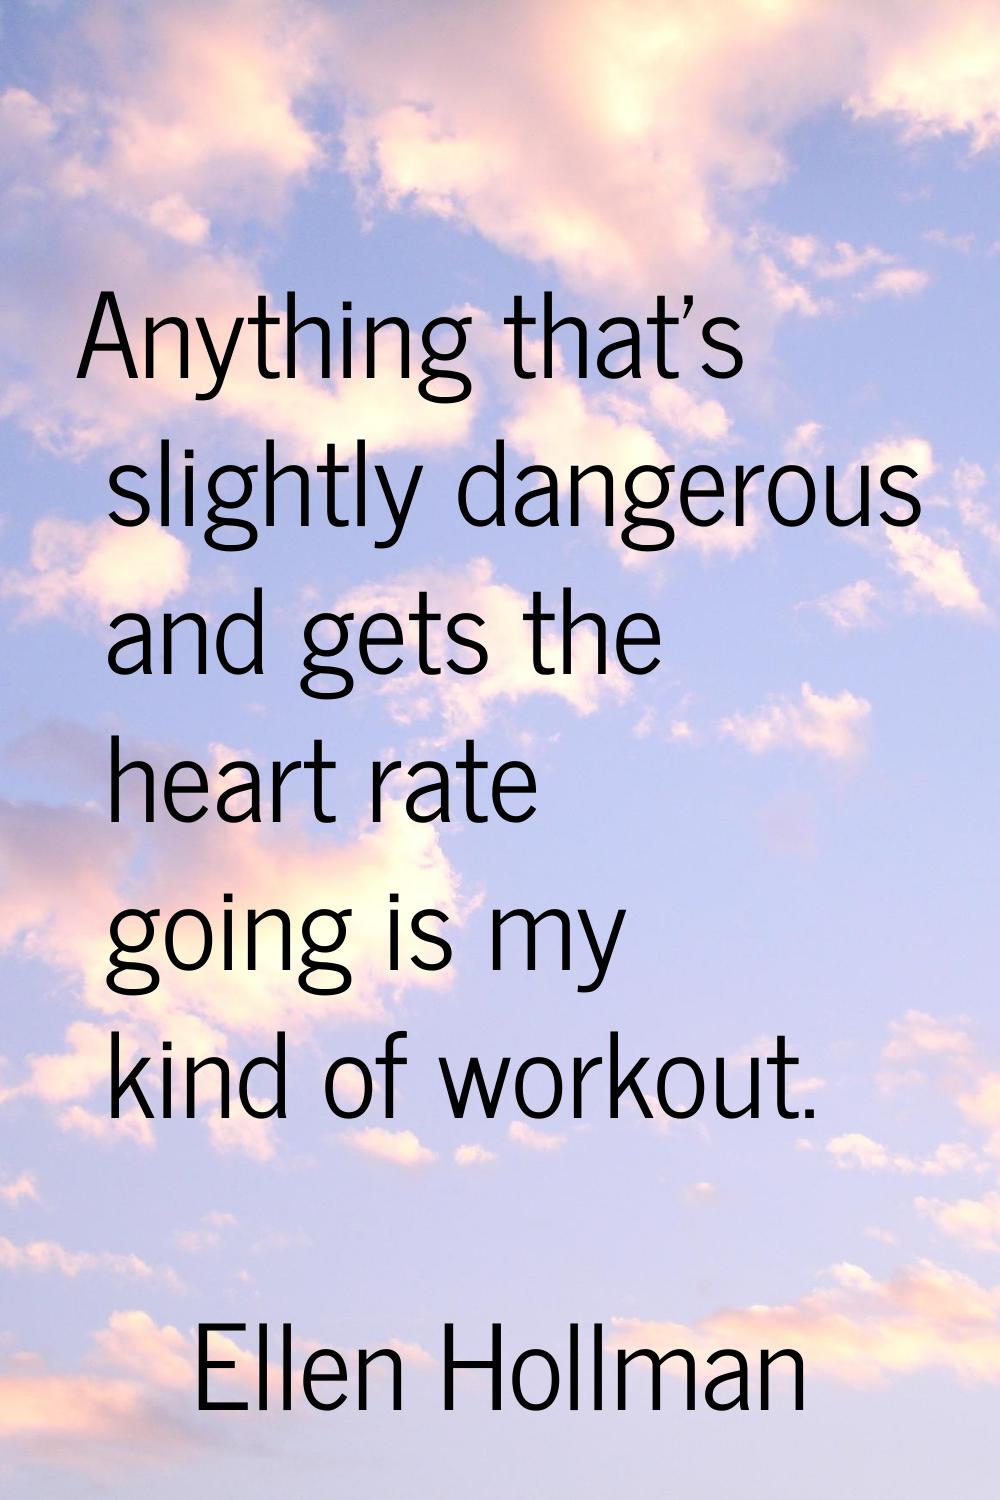 Anything that's slightly dangerous and gets the heart rate going is my kind of workout.